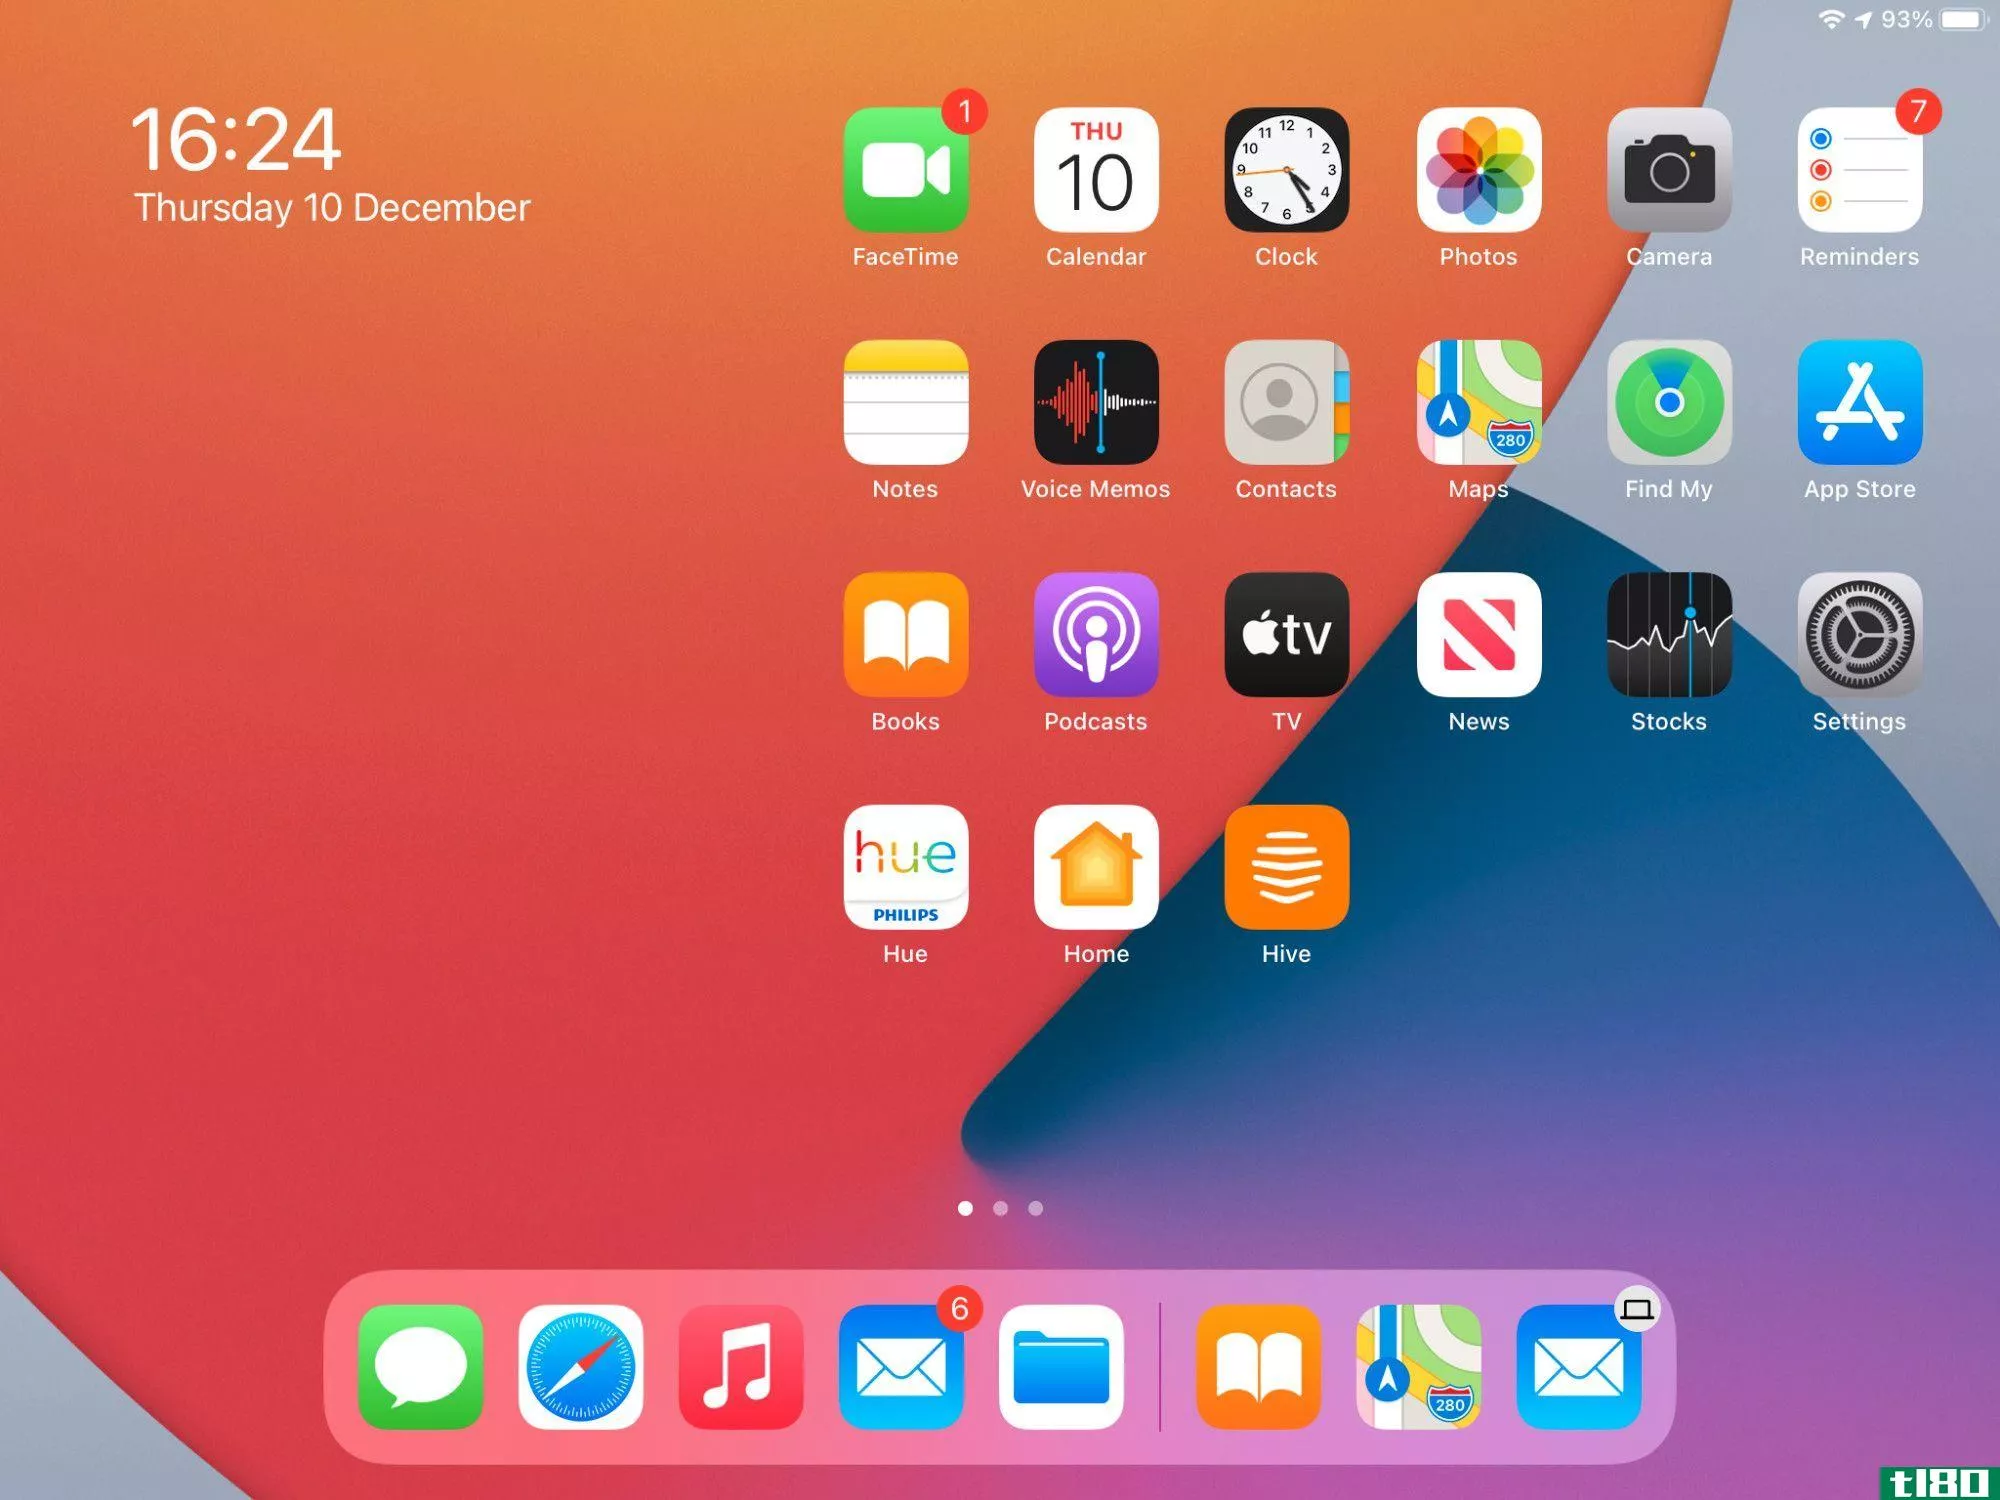 iPad Home screen showing Handoff icon in the Dock